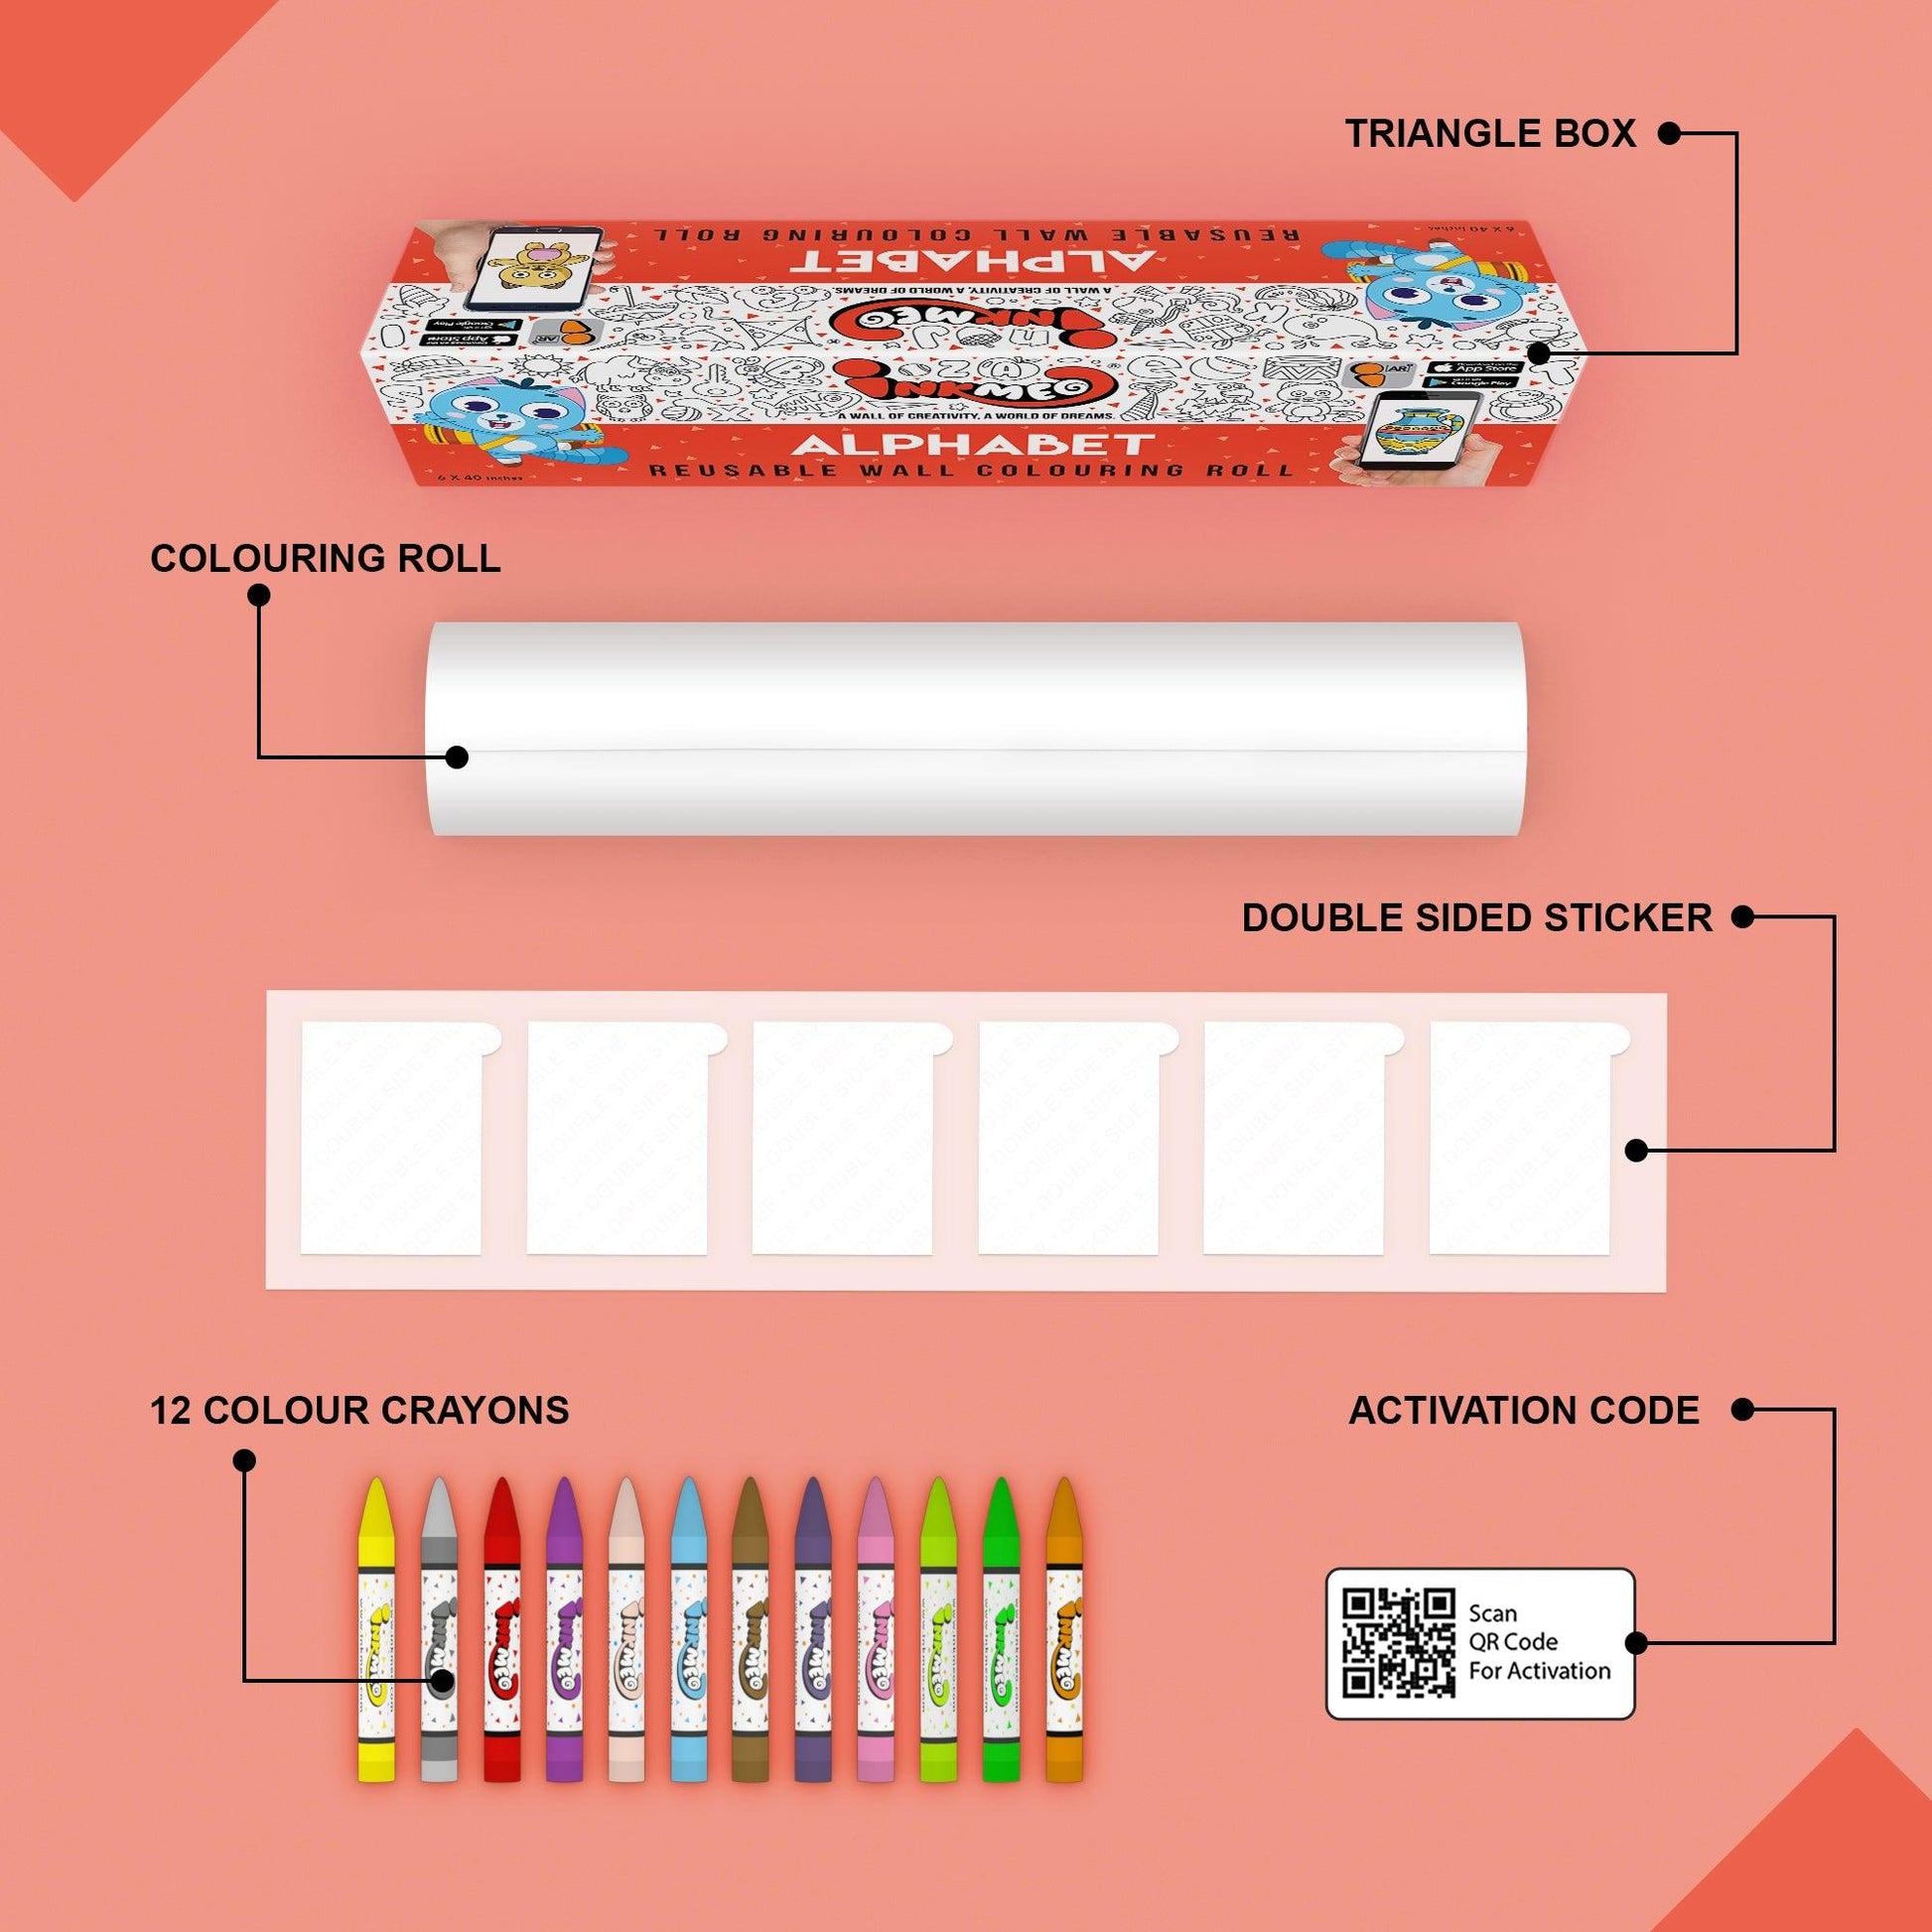 The image depicts a red background with a single triangular box, a coloring roll, 6 double-sided stickers, 12 colored crayons, and an activation code.